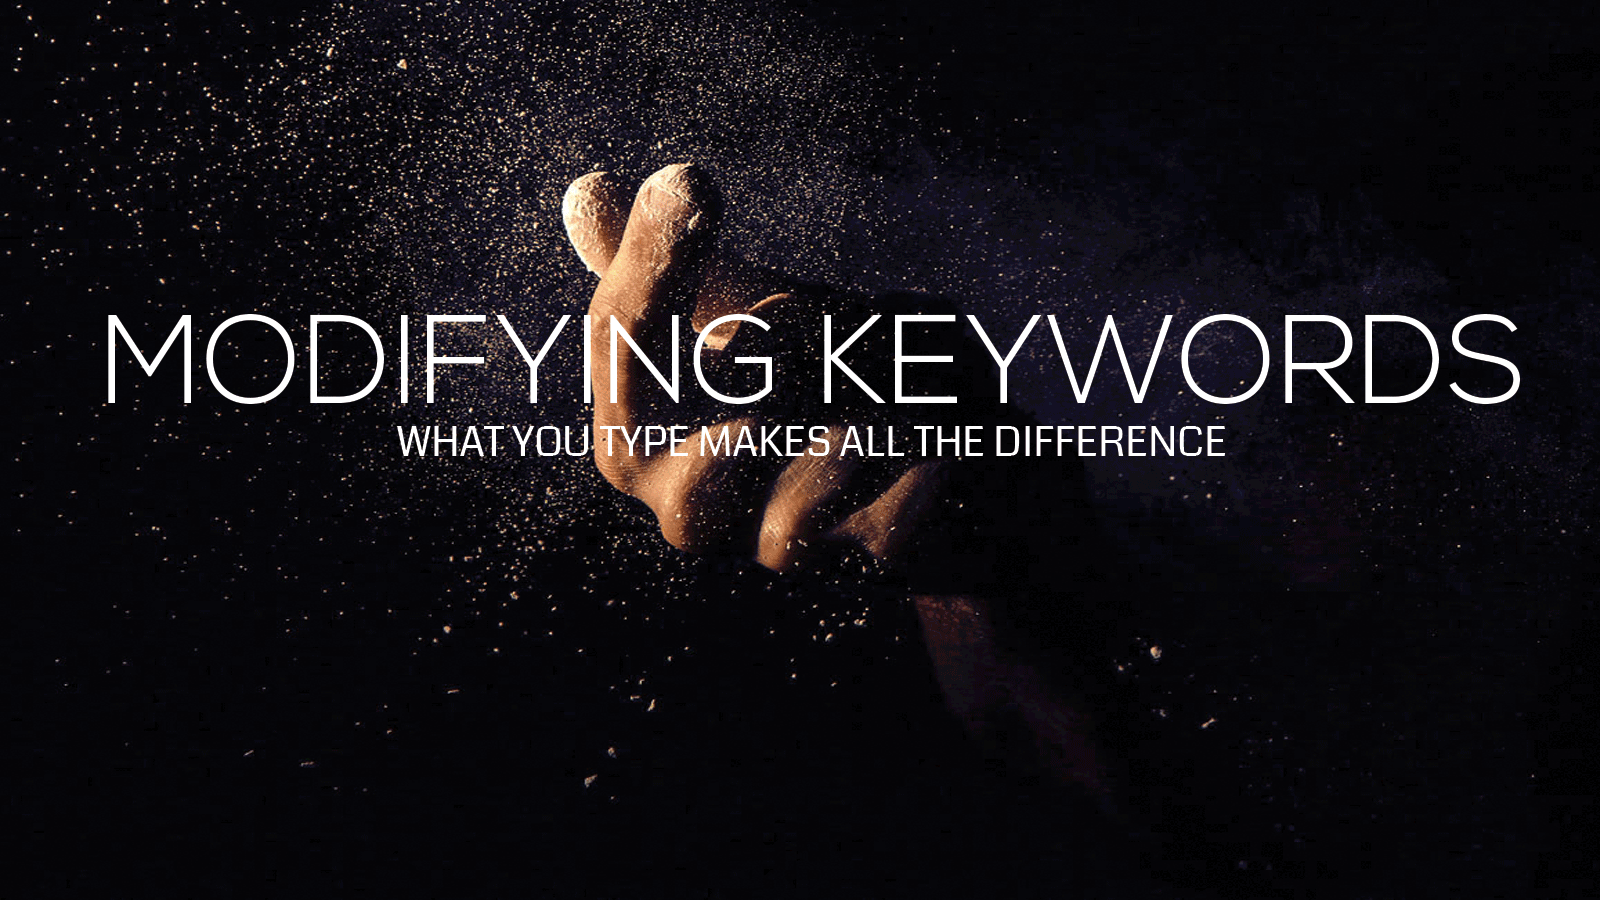 What you type makes all the difference: Modifying keywords